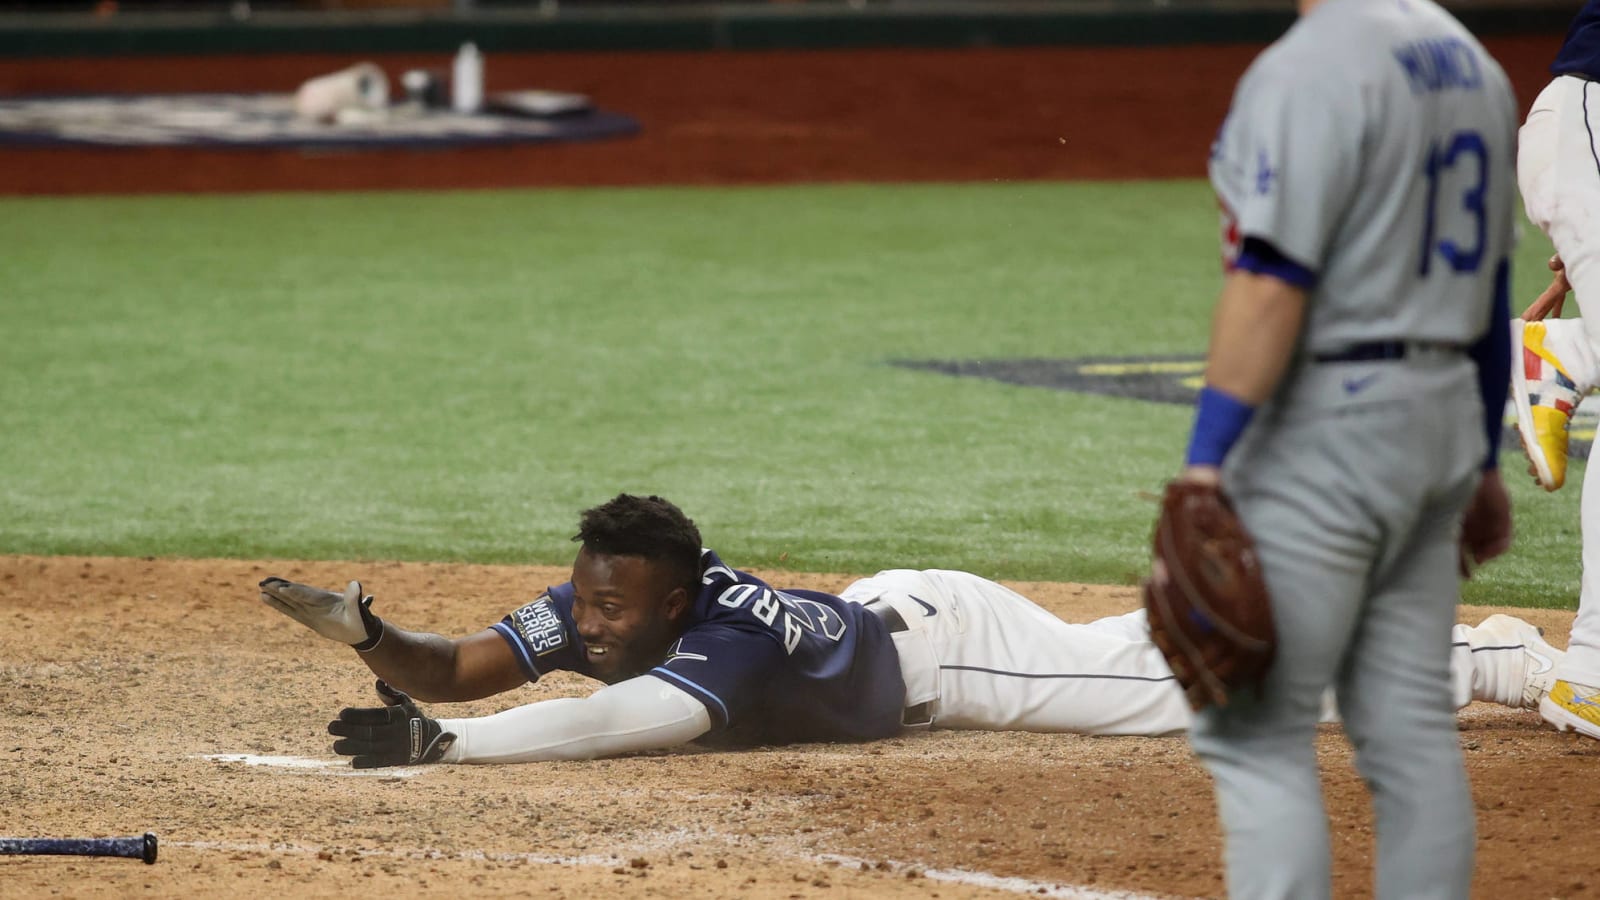 Rays beat Dodgers on crazy final play in Game 4